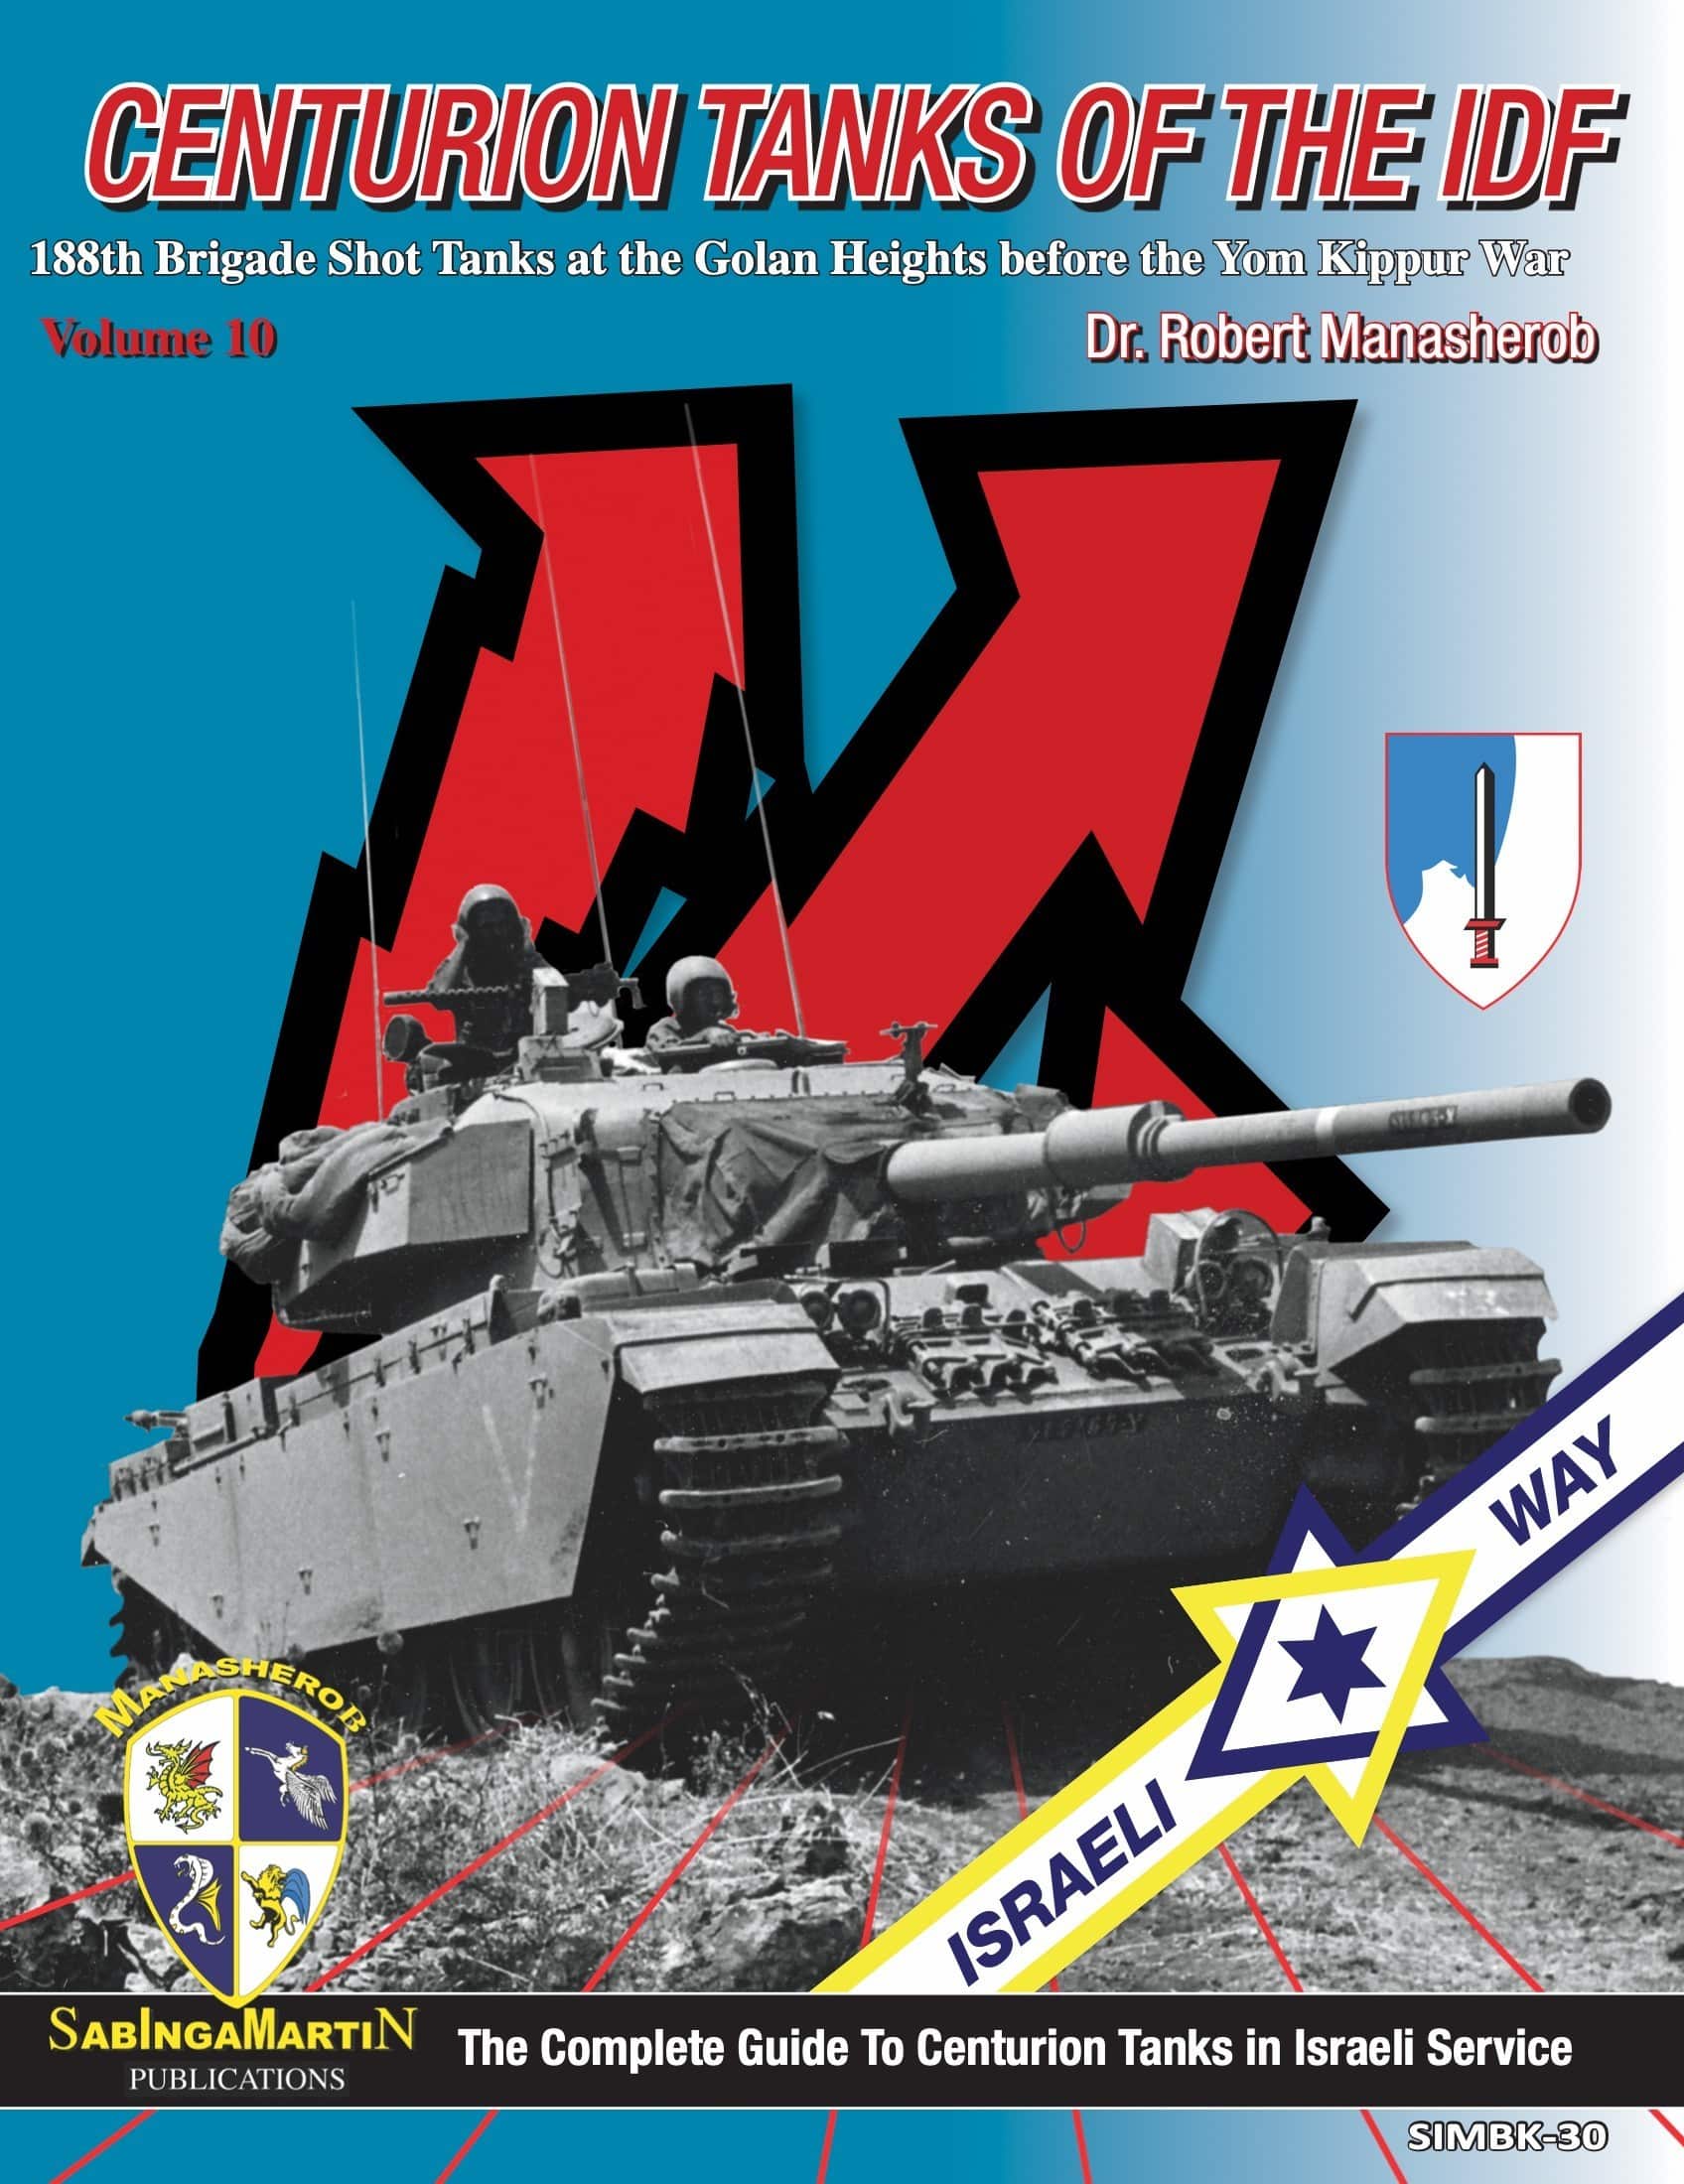 Canturion Tanks of the IDF from SabIngaMartin Publications